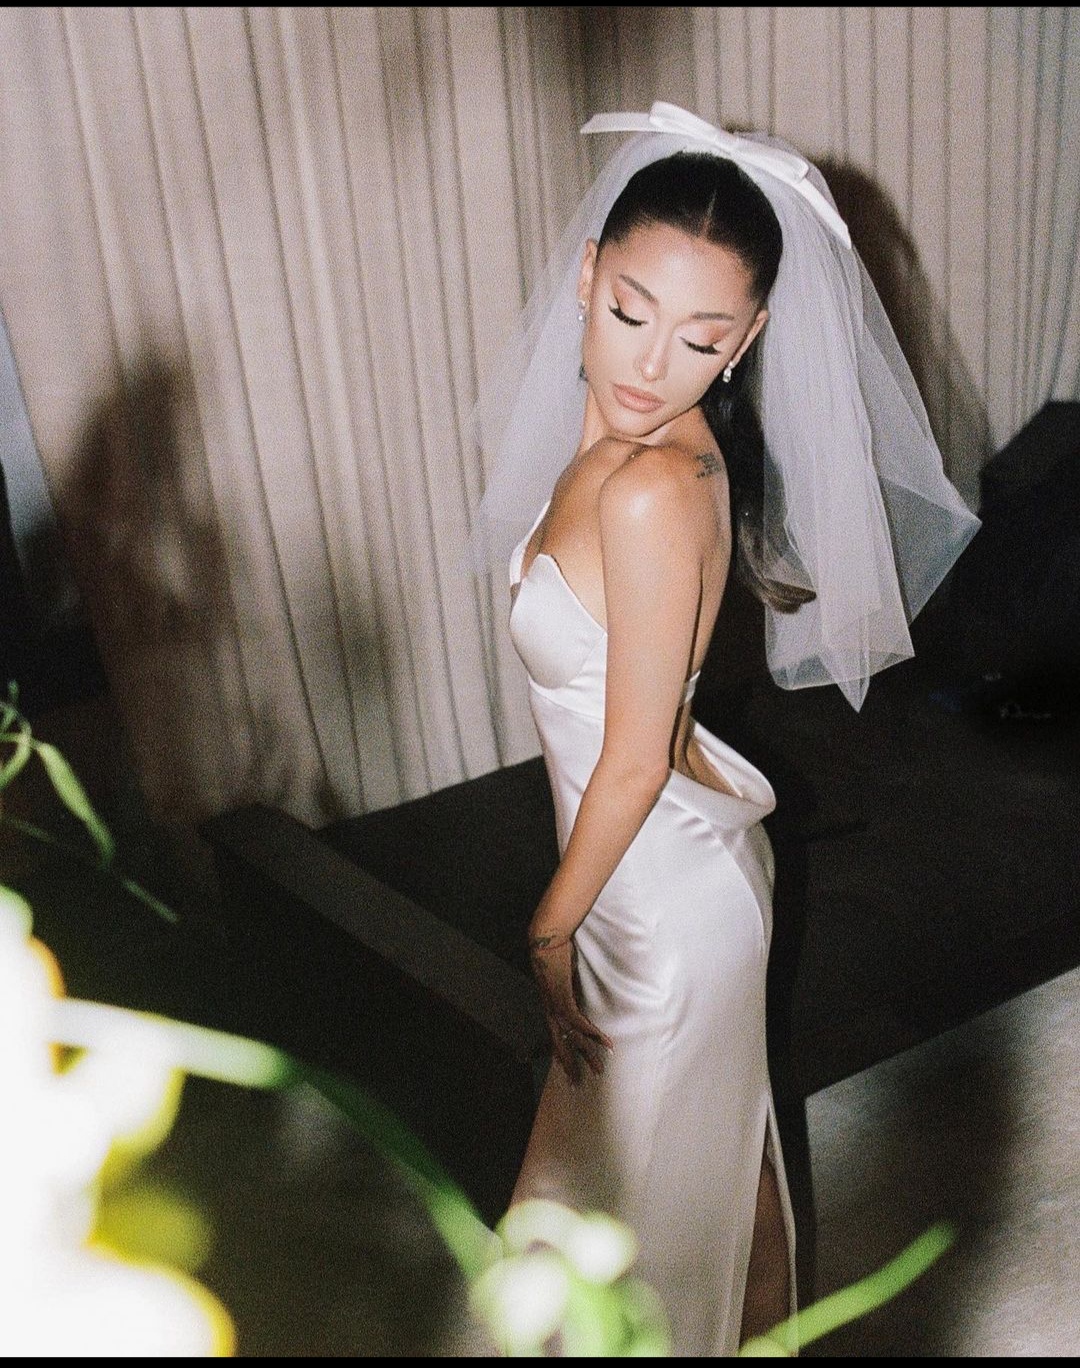 Wedding Worthy Gown Looks Of Ariana Grande To Copy! Take Alleviation |  IWMBuzz